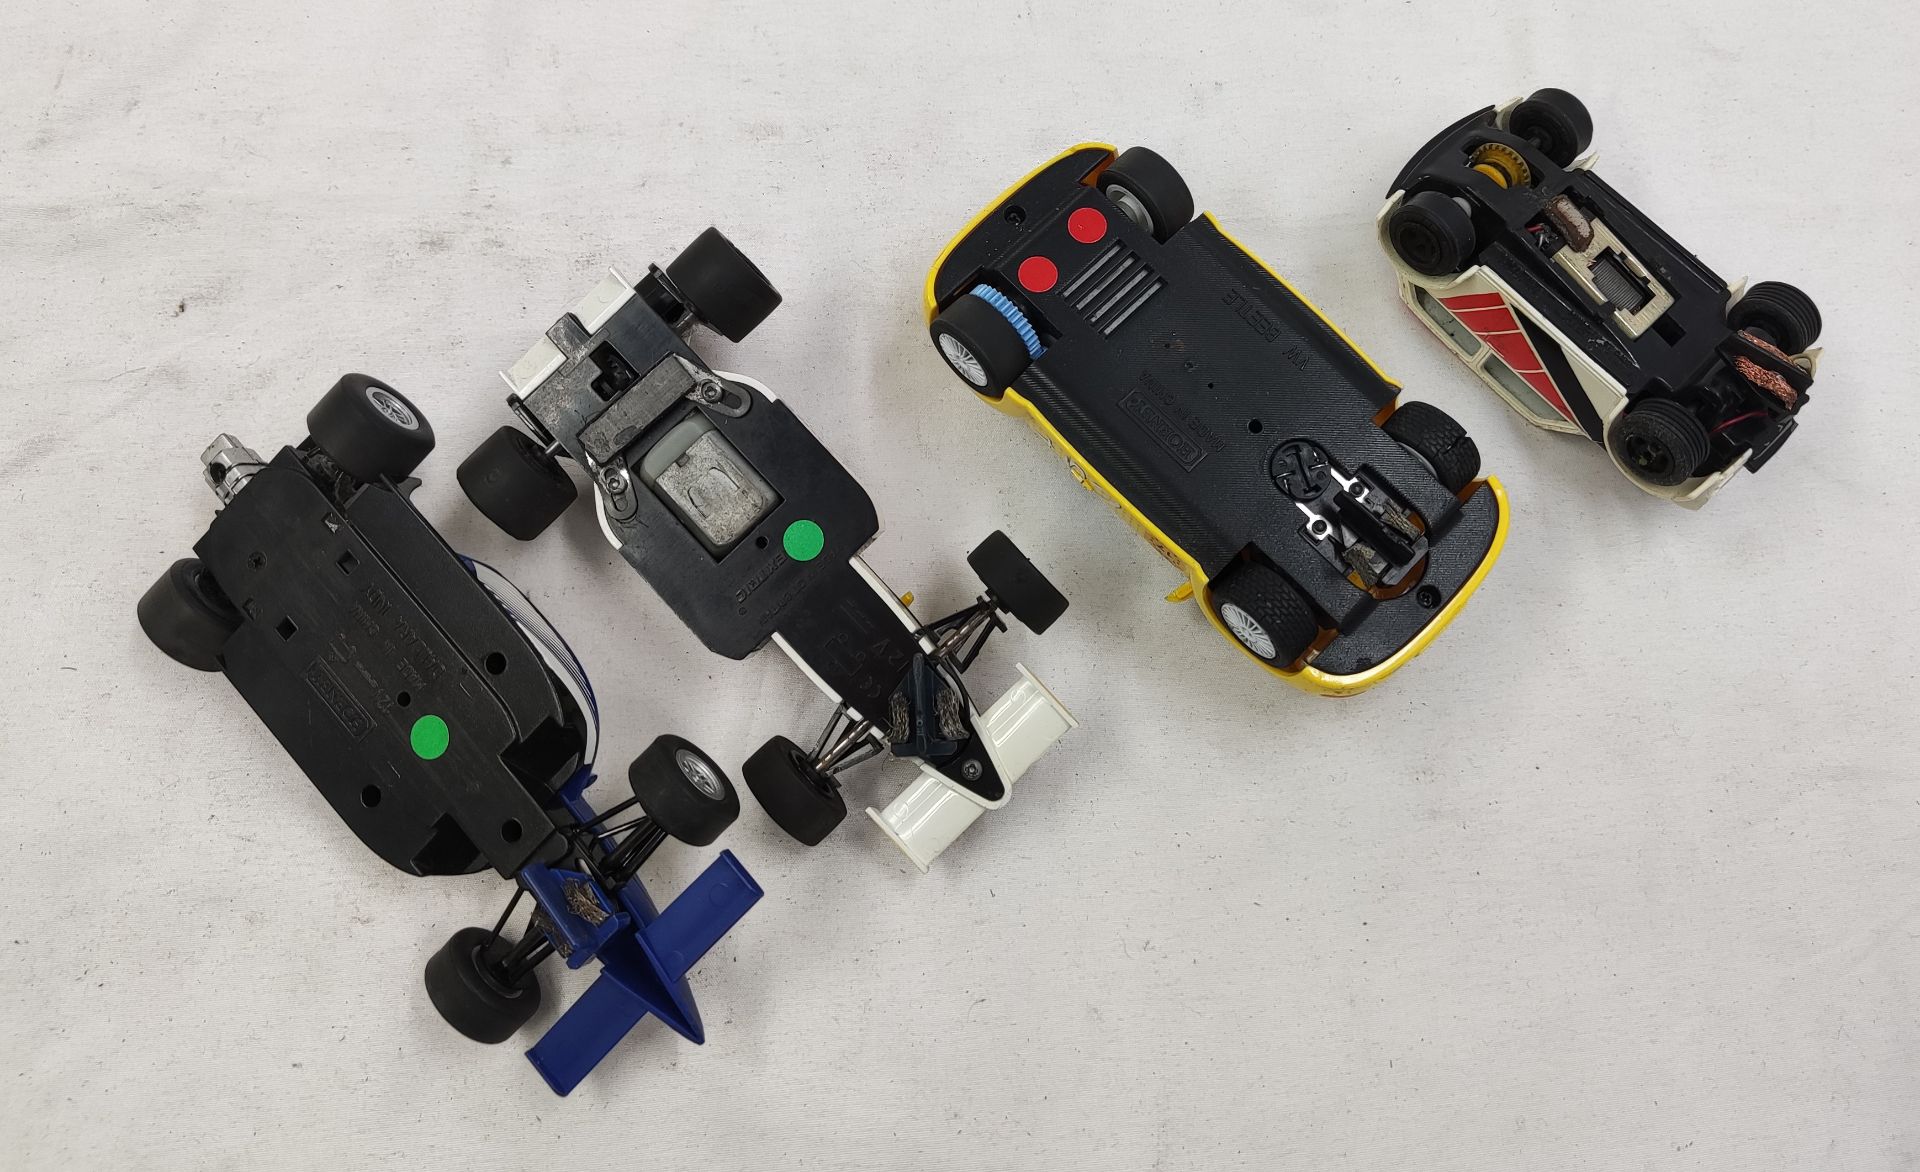 4 x Scalextric Cars Including VW Beetle, F1 Car, Open Wheeler and Mini Clubman 1275GT - Tested and - Image 10 of 11